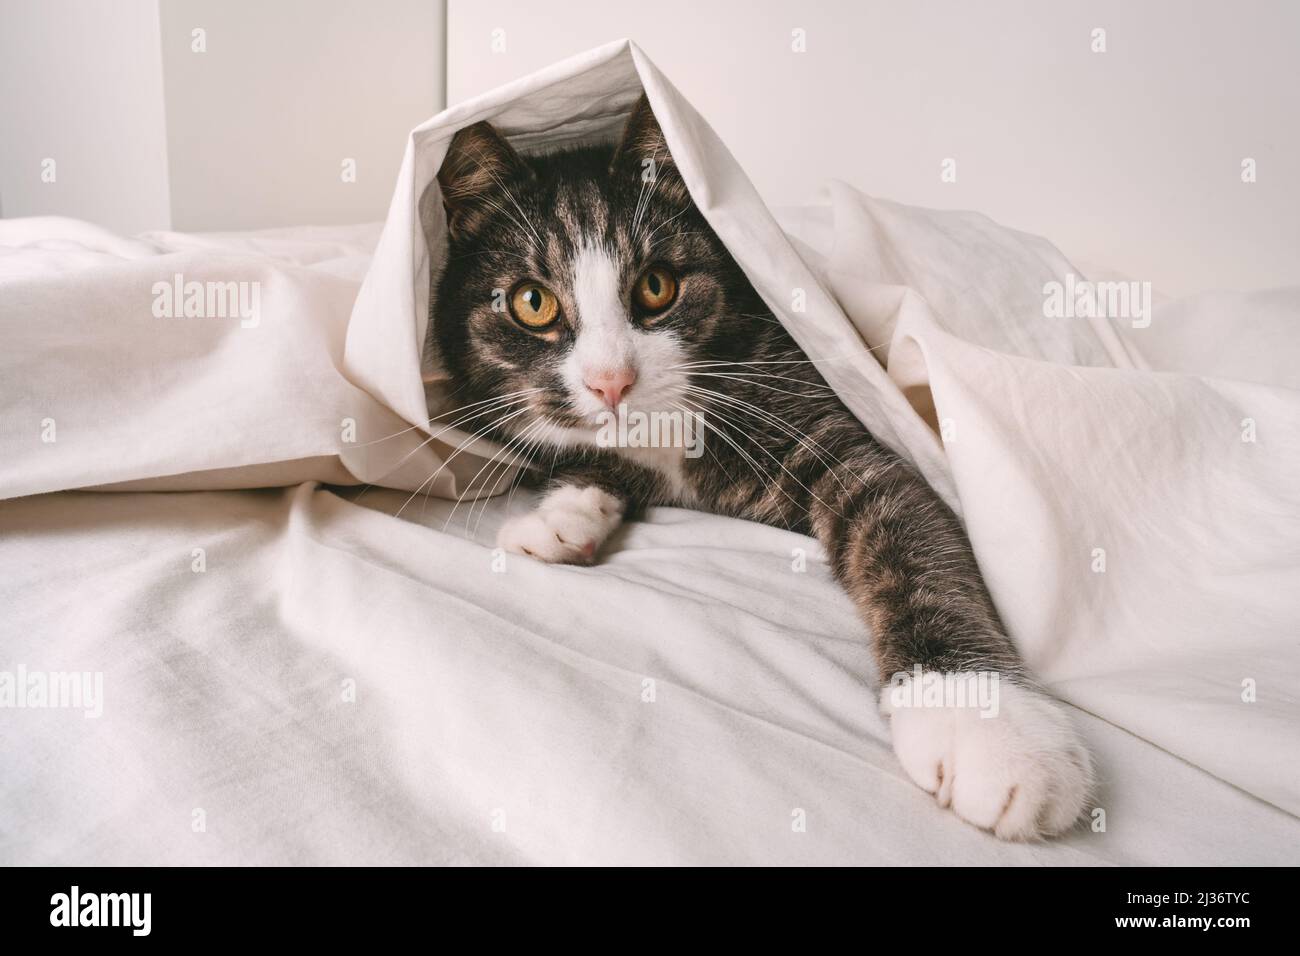 Funny playful tabby cat under white sheet in bed Stock Photo